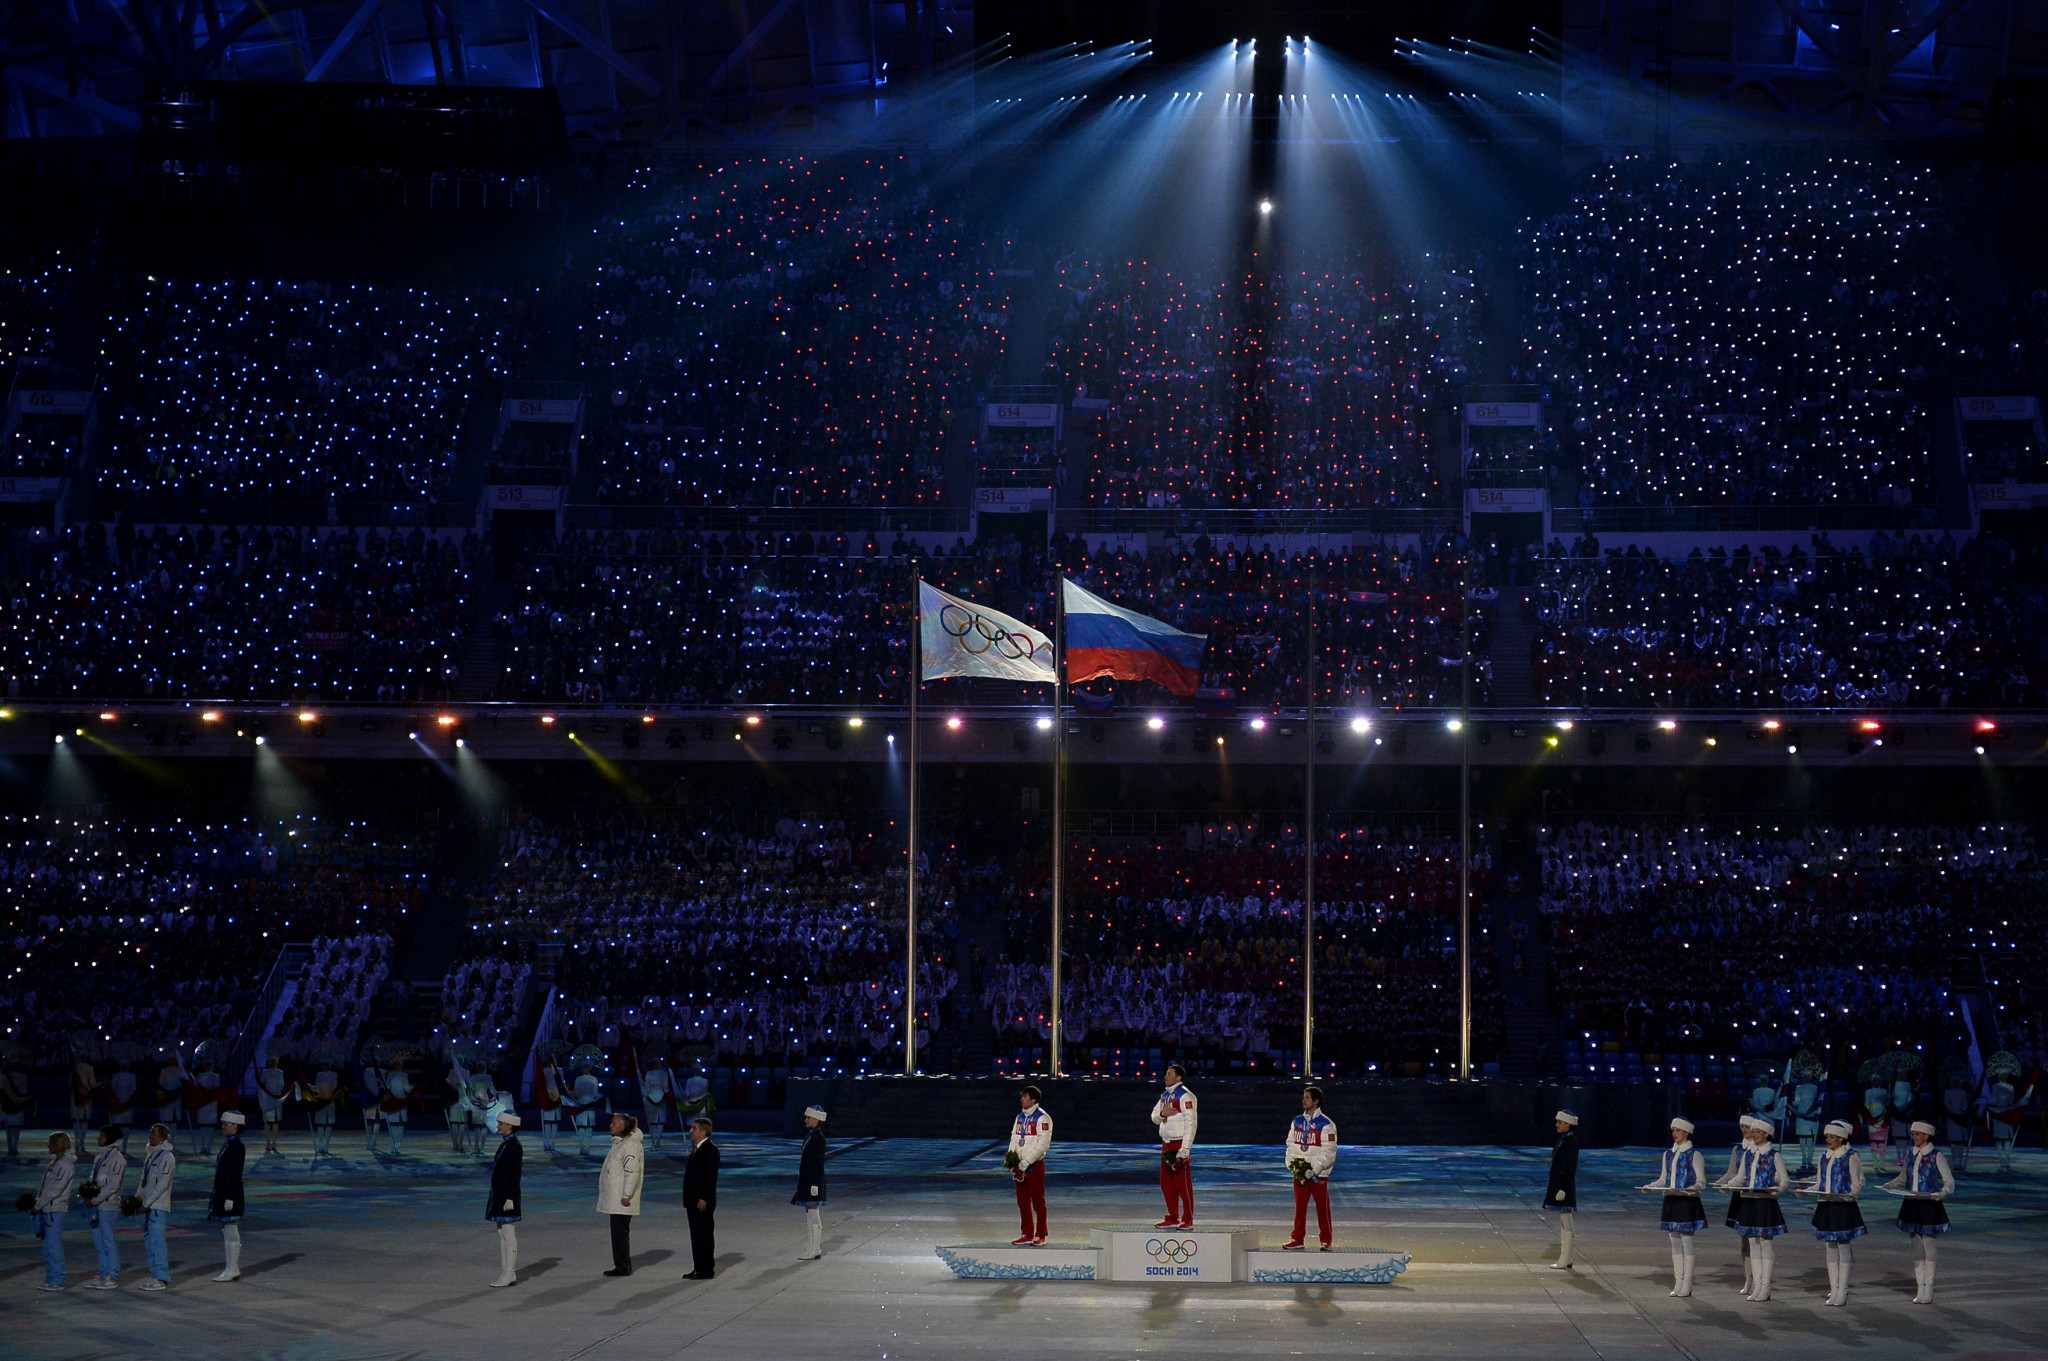 Have the IOC compromised too much by potentially allowing the Russian flag in the Closing Ceremony ©Getty Images